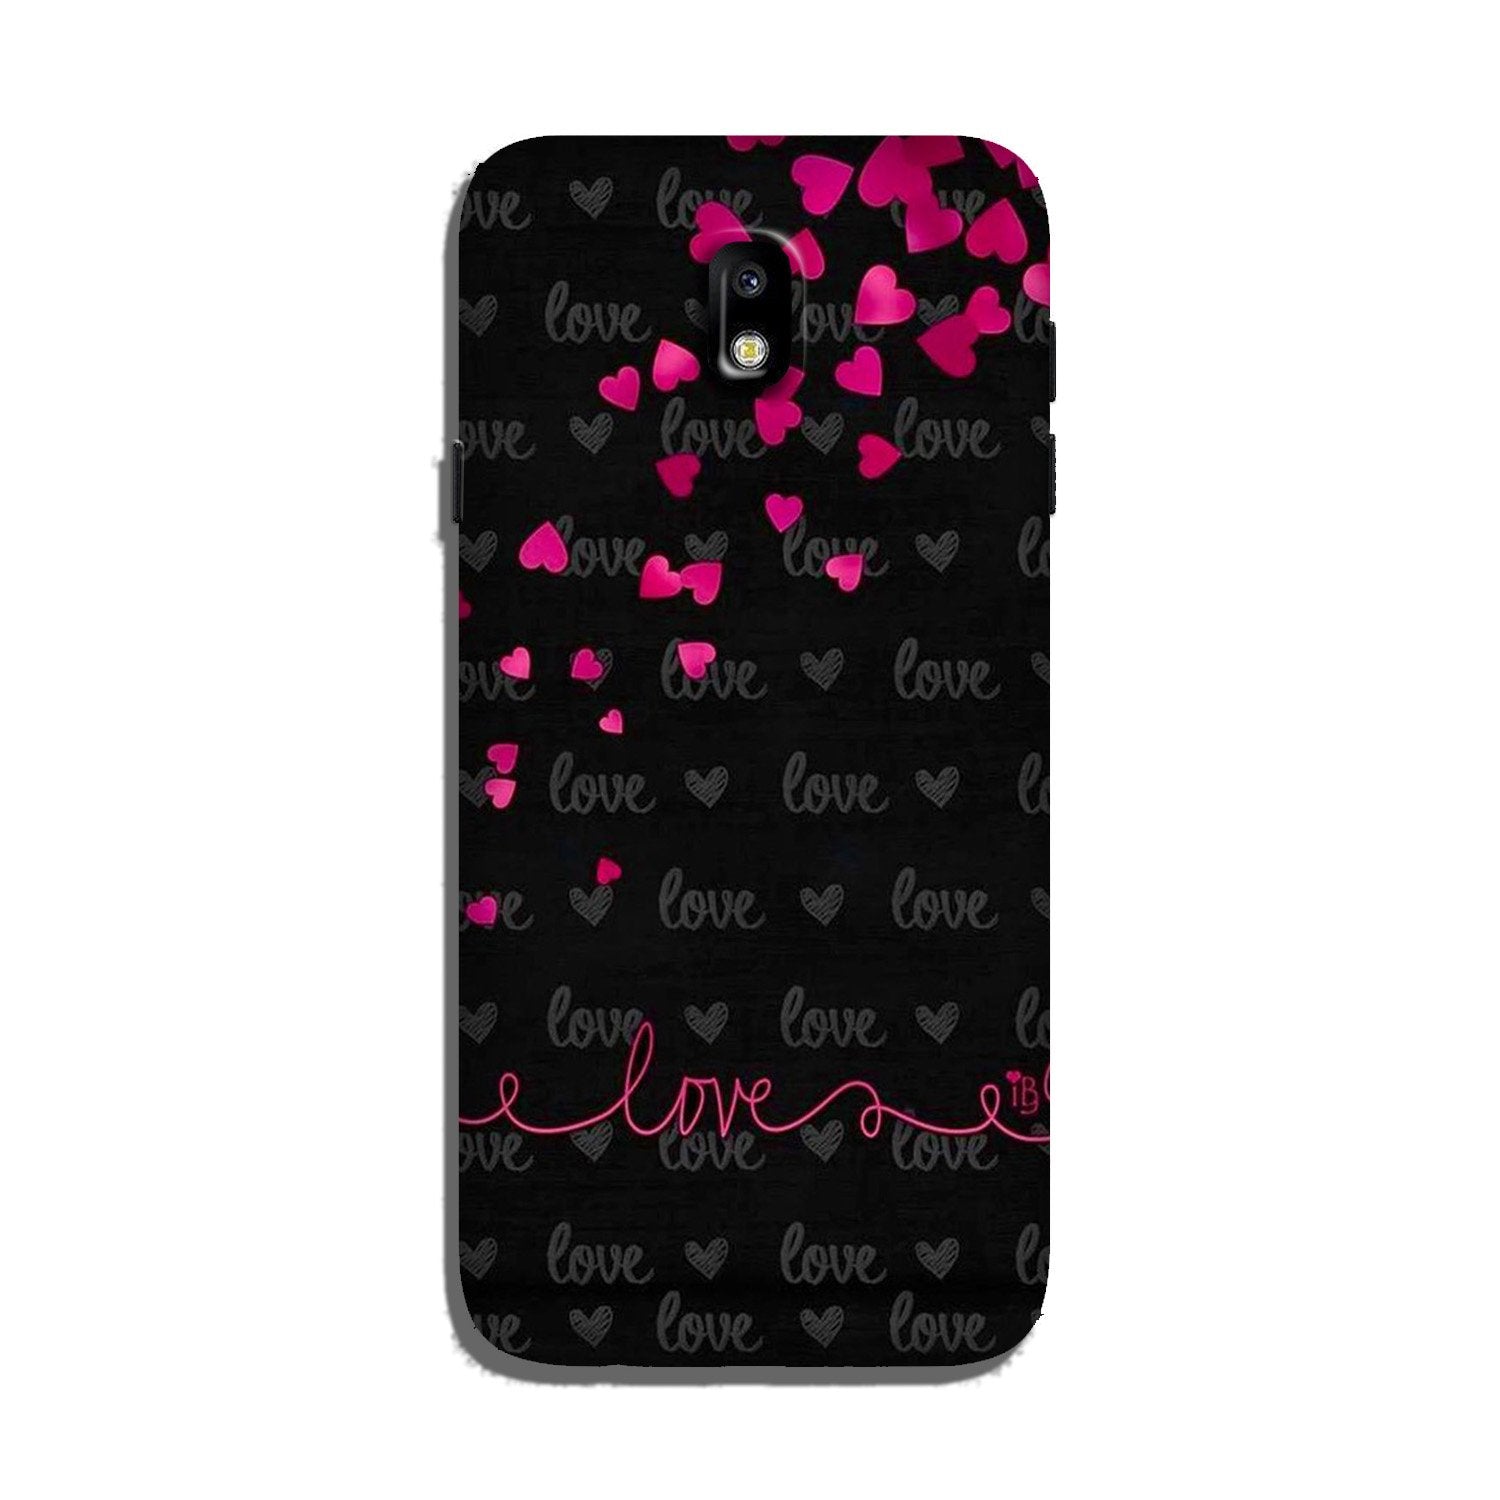 Love in Air Case for Galaxy J3 Pro